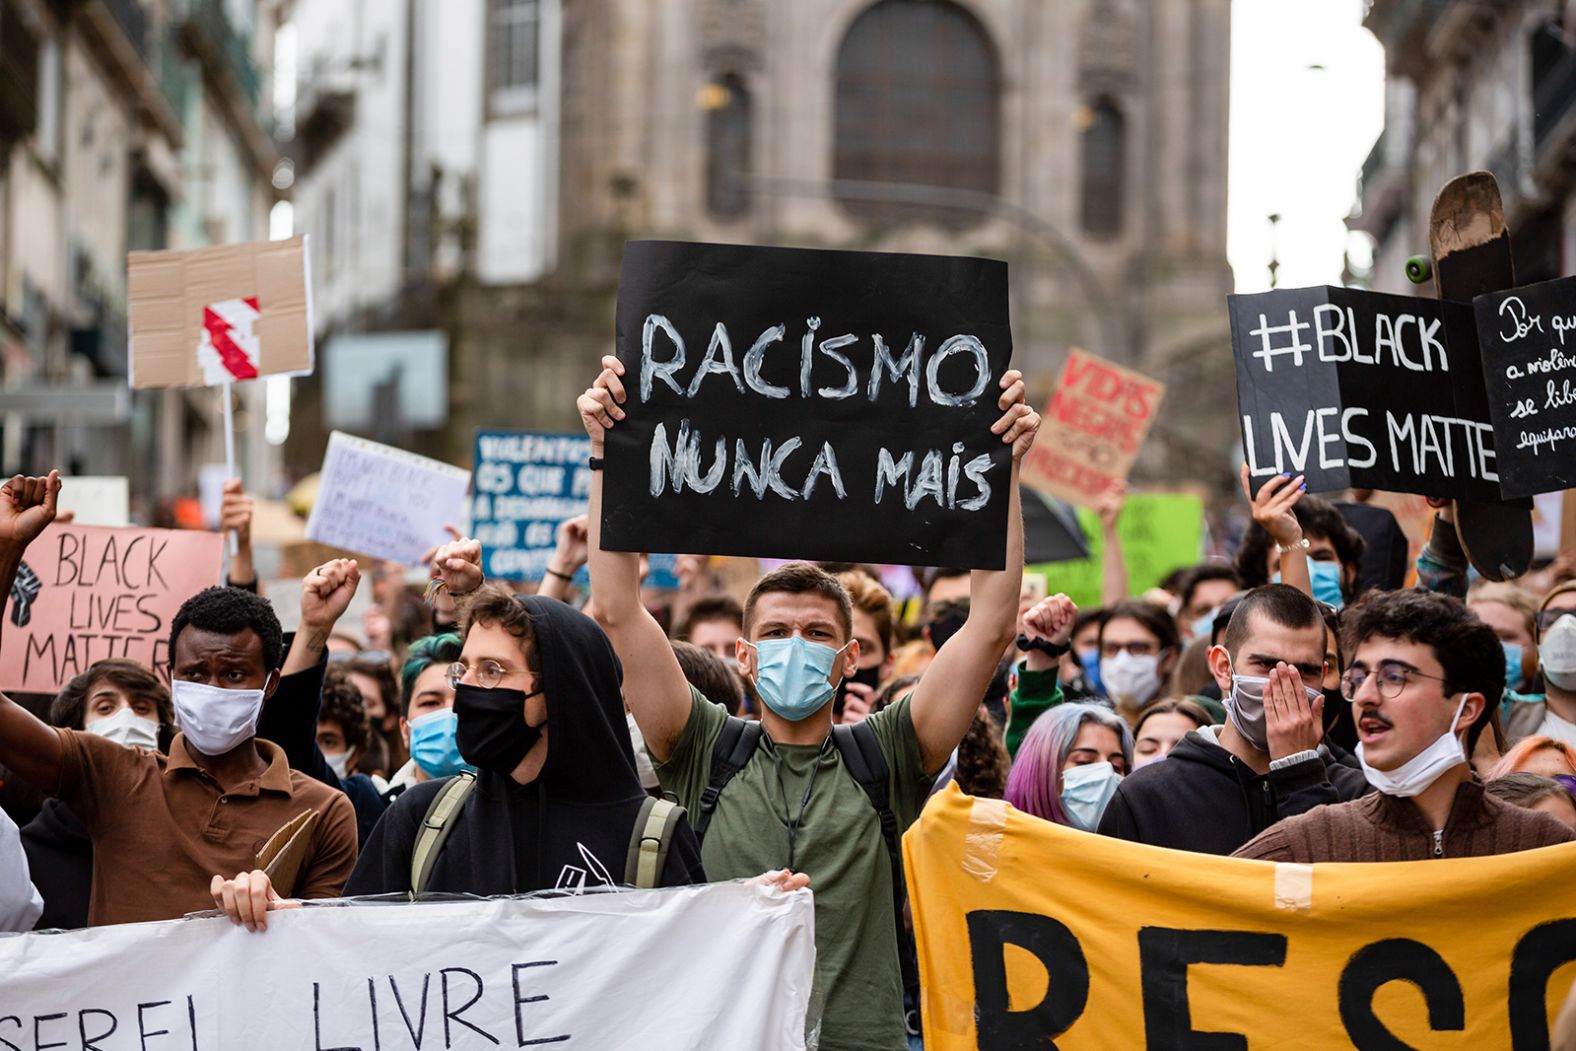 Protesters hold signs denouncing racism during a demonstration in Porto, Portugal, on June 7. 